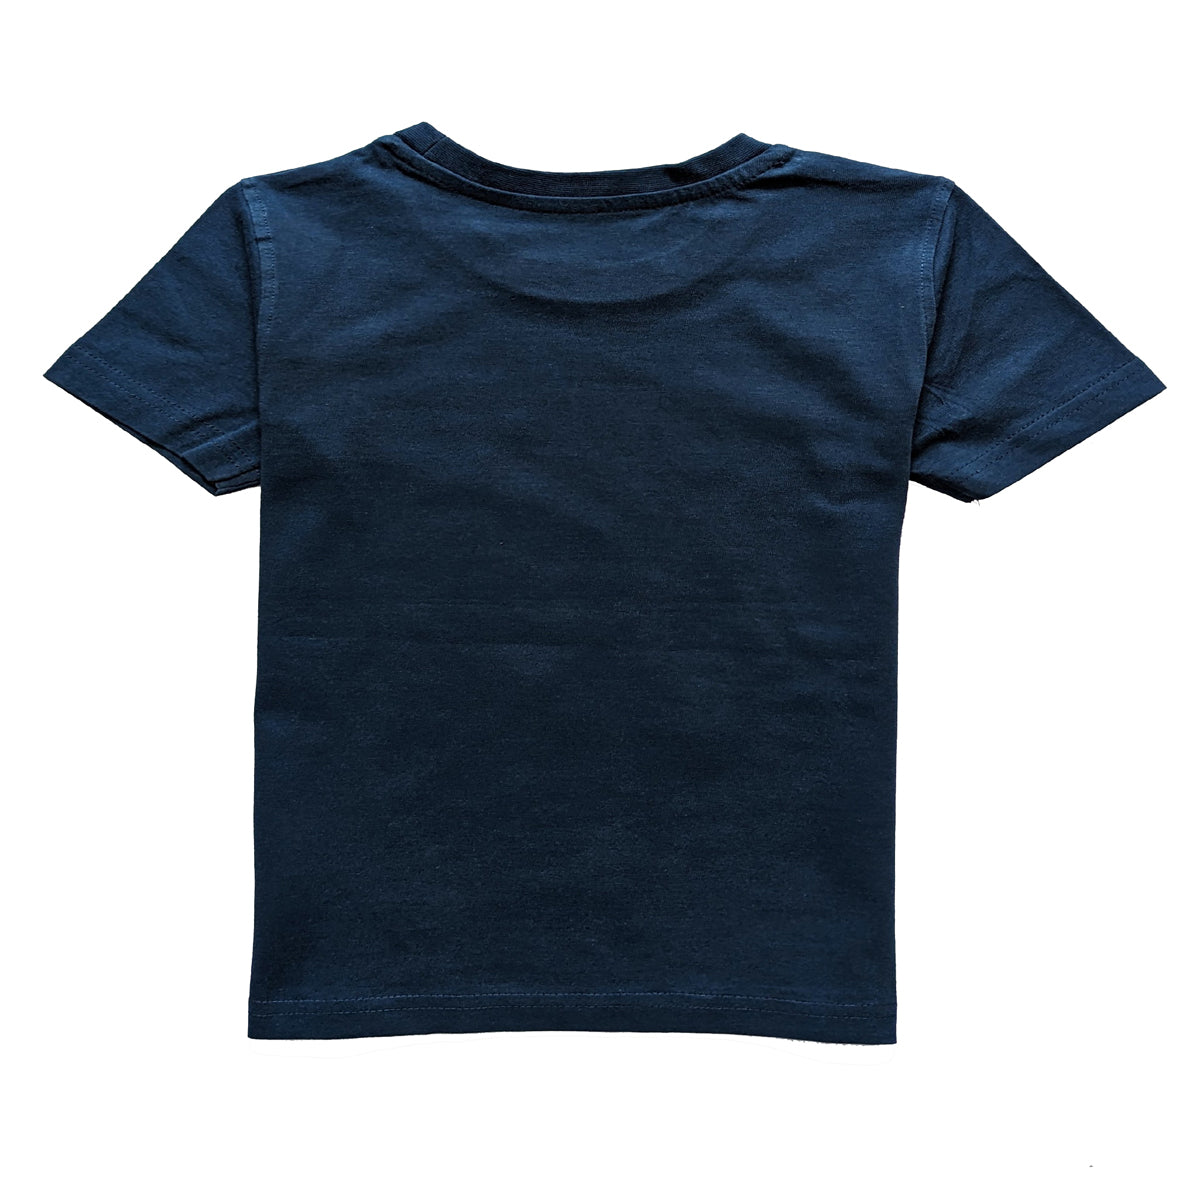 Boys Navy Blue Crocodile Graphic T-Shirt with Playful Design